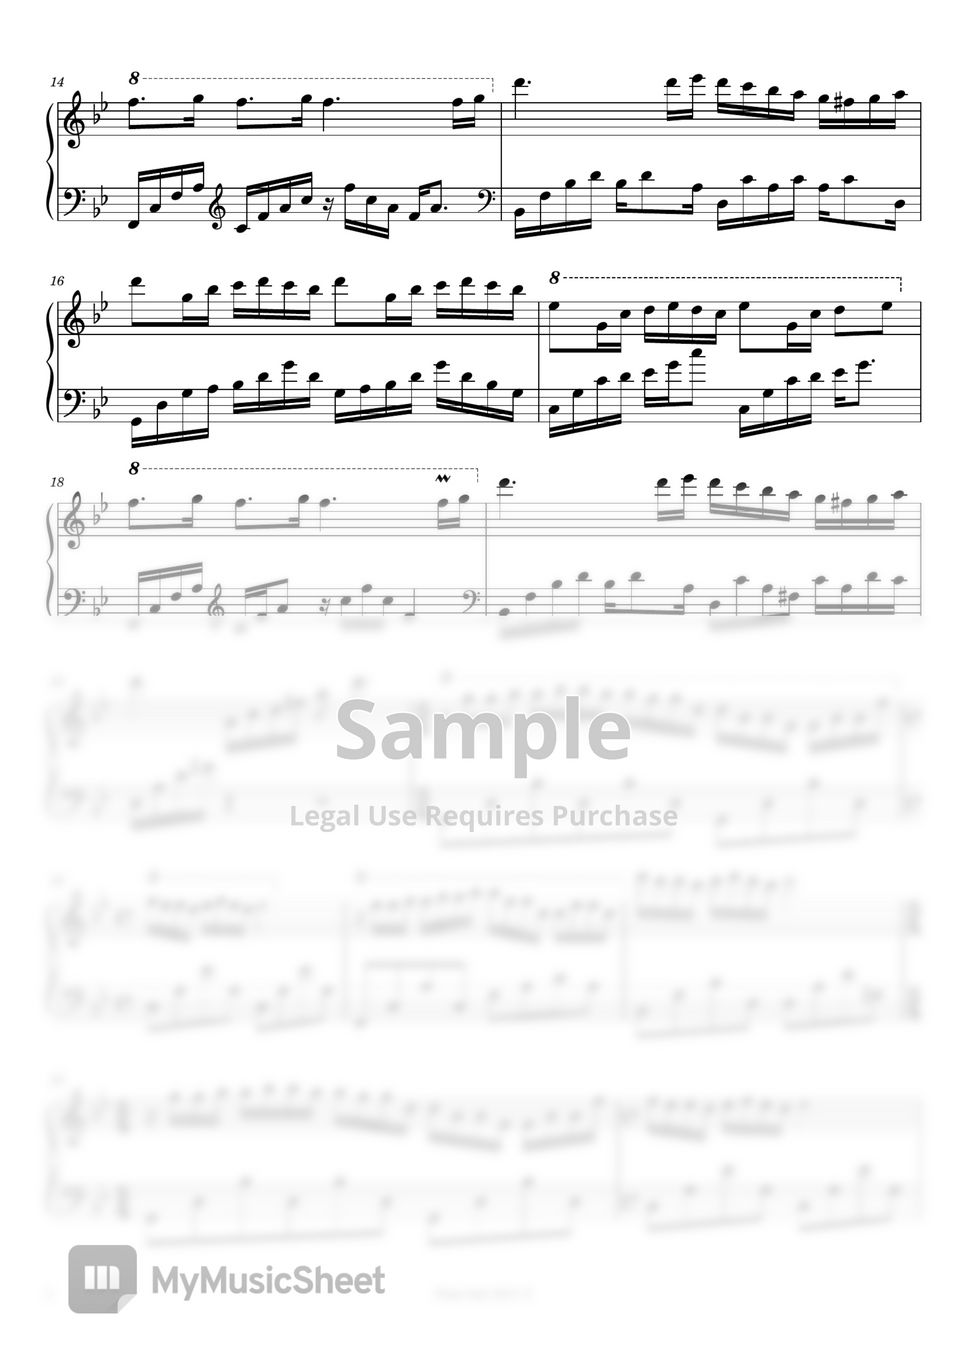 f-chopin-spring-waltz-mariage-d-amour-lembar-musik-by-piano-suit